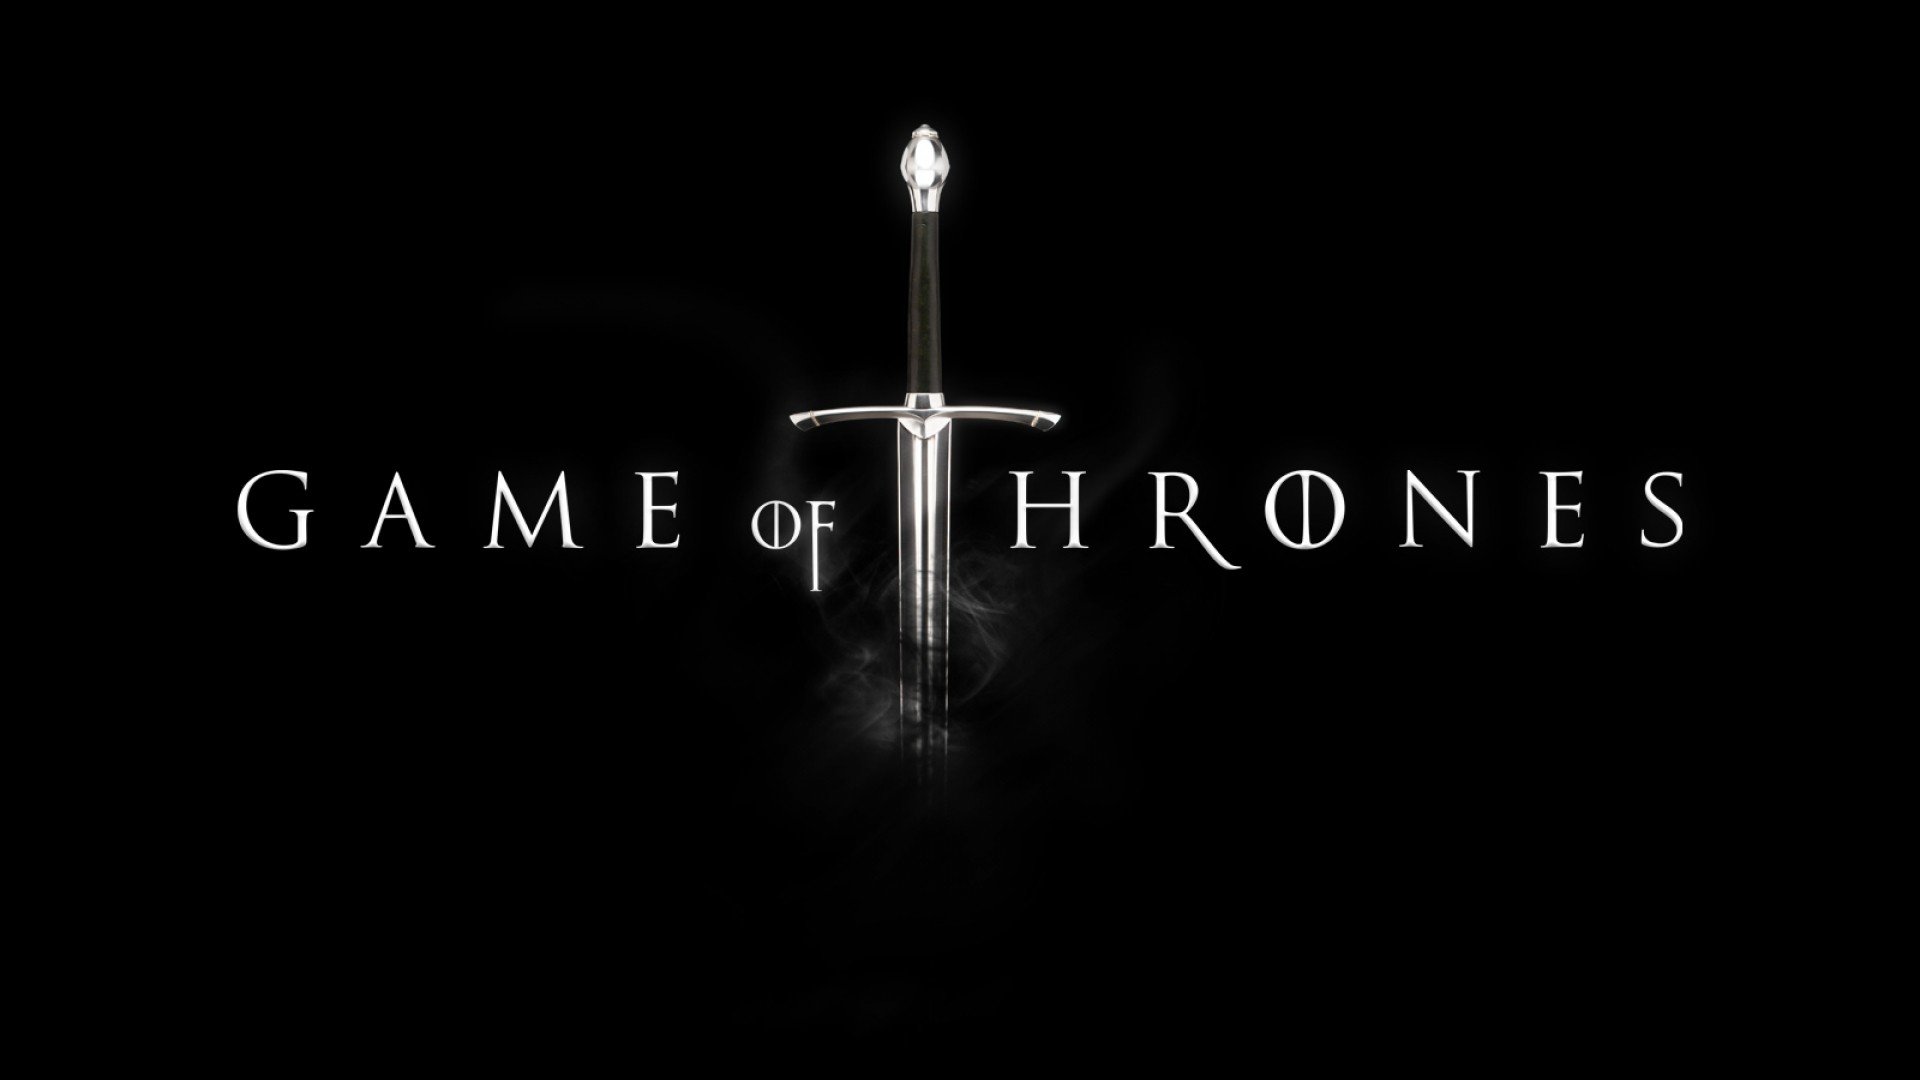 game of thrones exclusive hd wallpapers game of thrones wallpaper